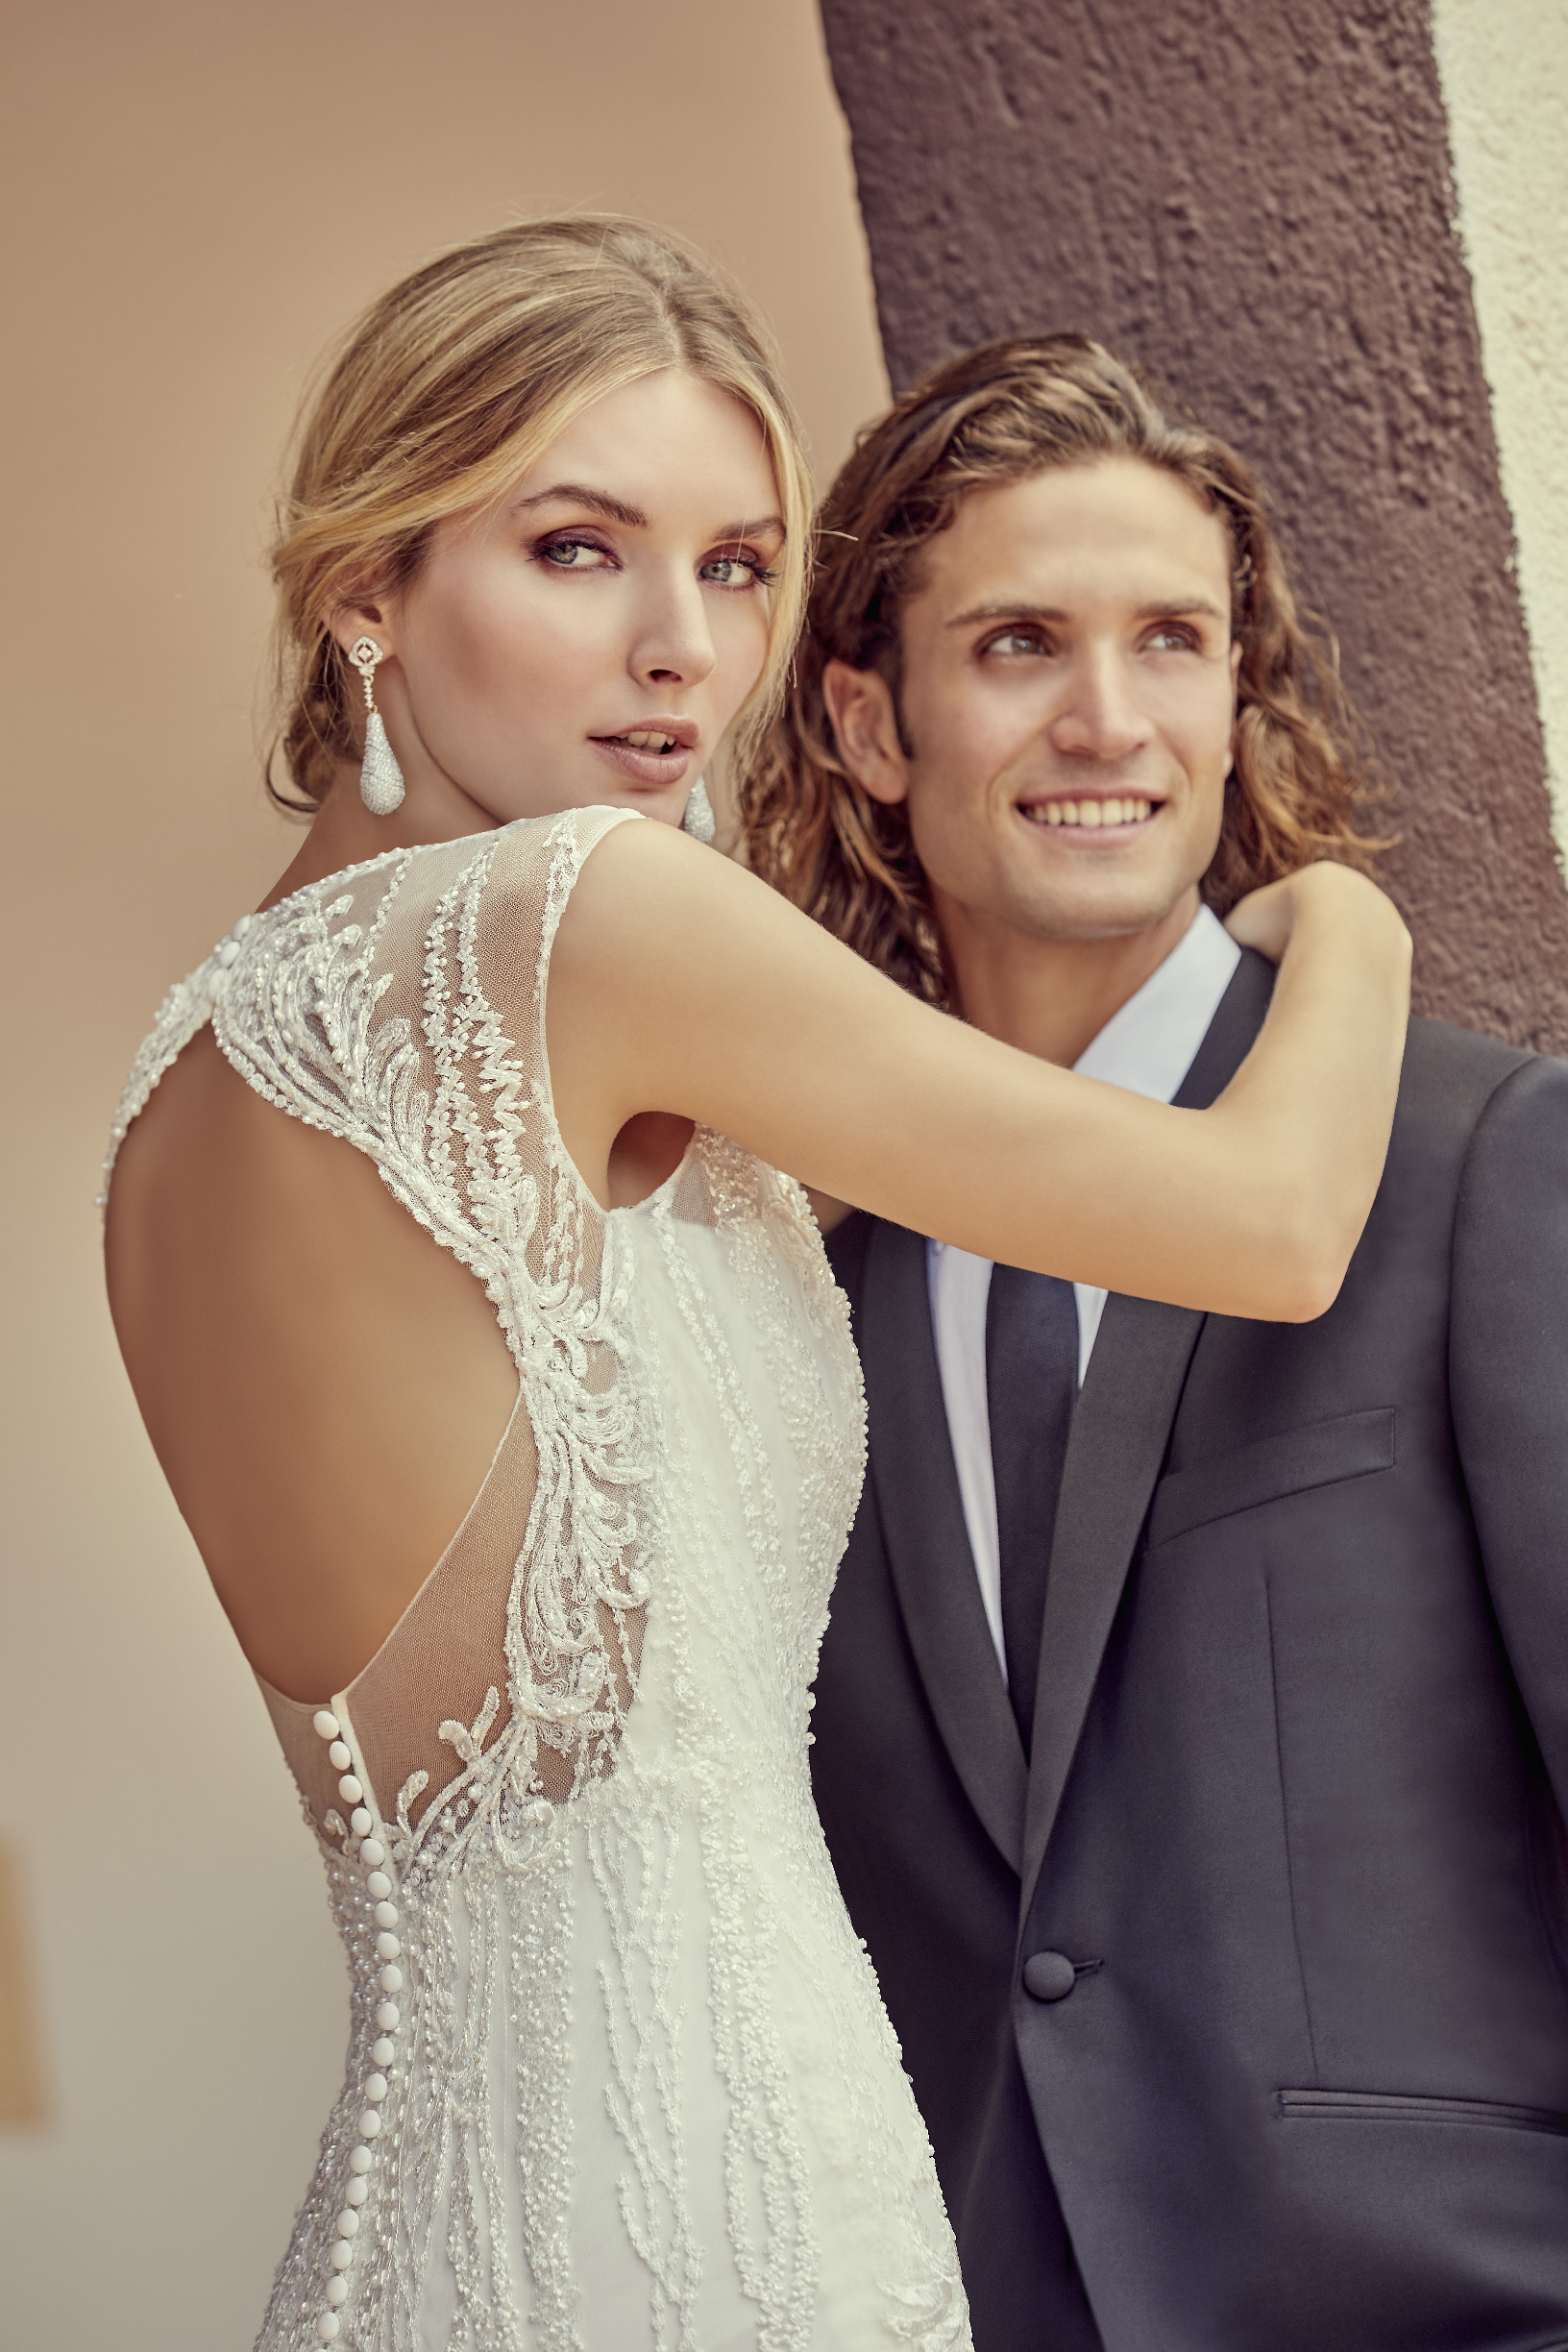 Woman in backless wedding dress with lace appliques hugging man in suit